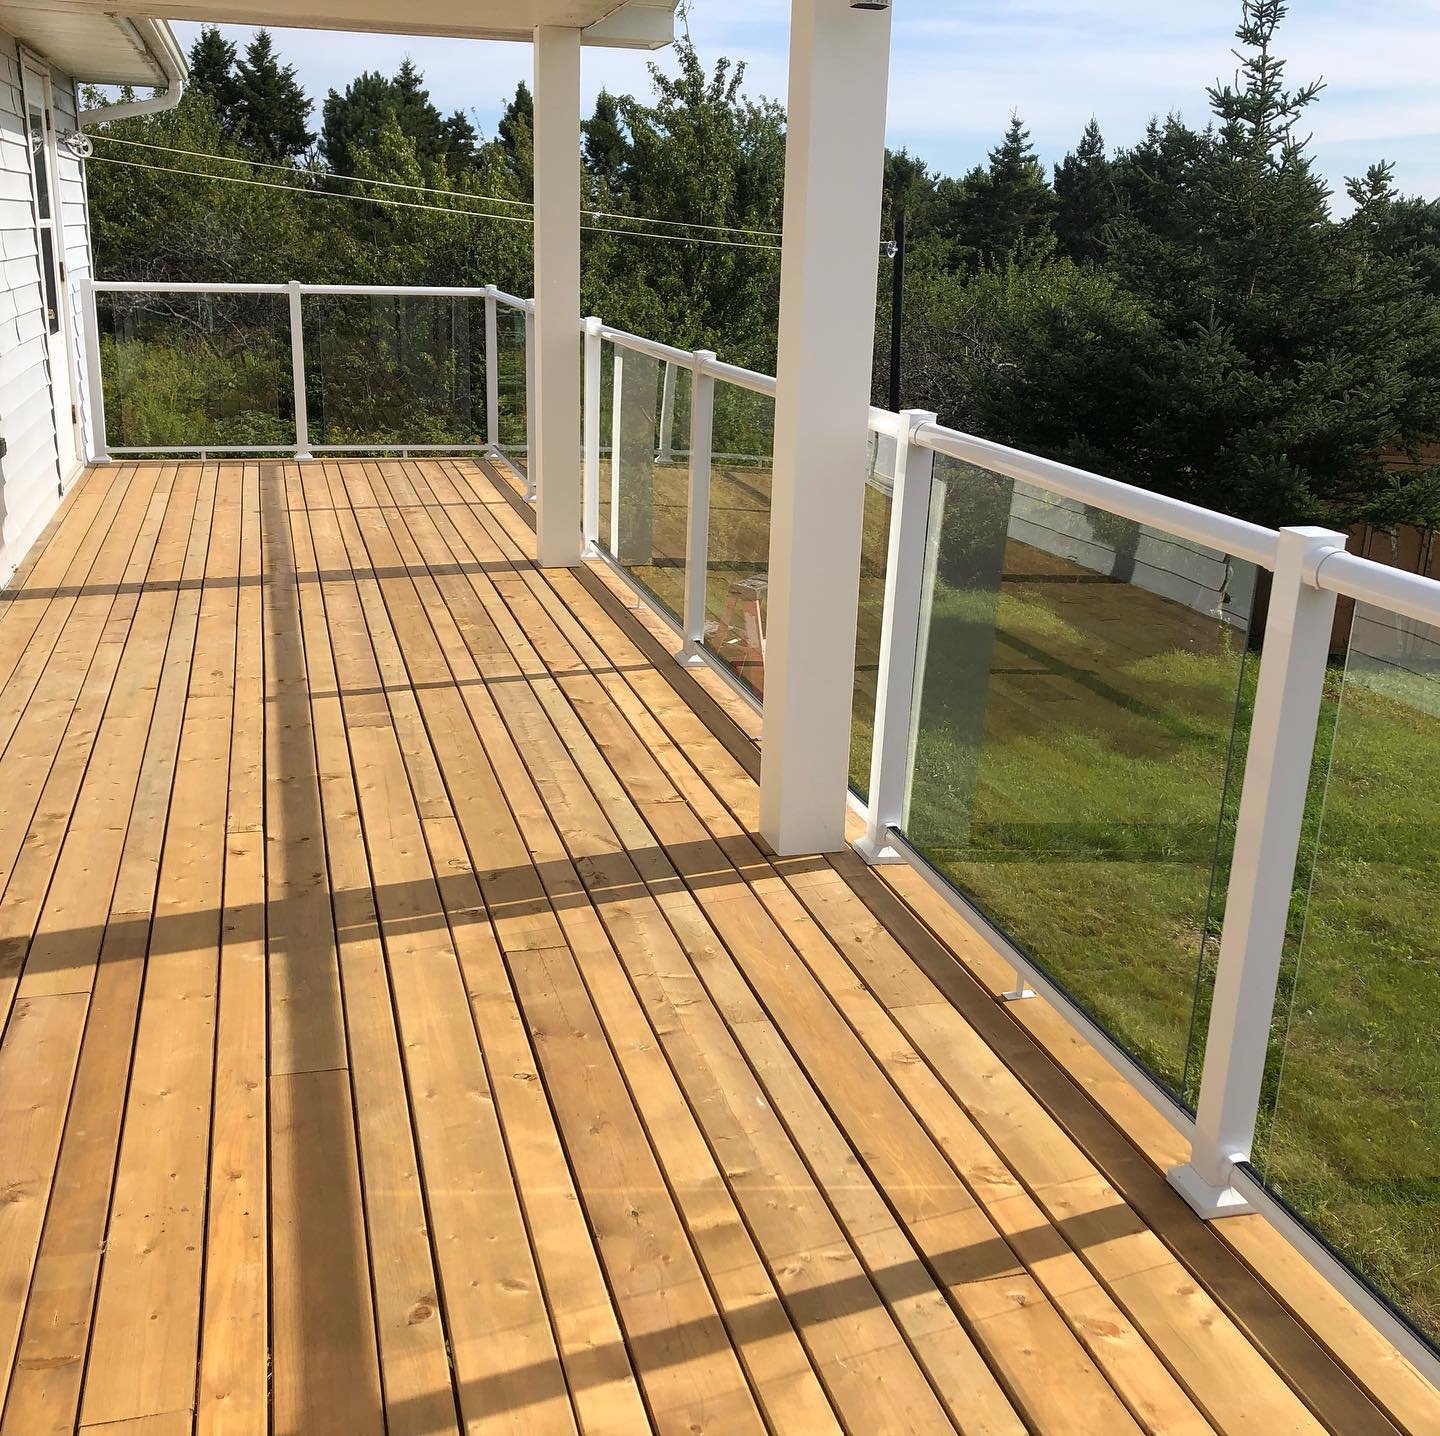 Alternated size deck boards with a faster-free surface, glass railing and versa column wraps #flawless 

#landscape #landscapephotography #contractor #deck #wood #glassrailing #work #novascotia